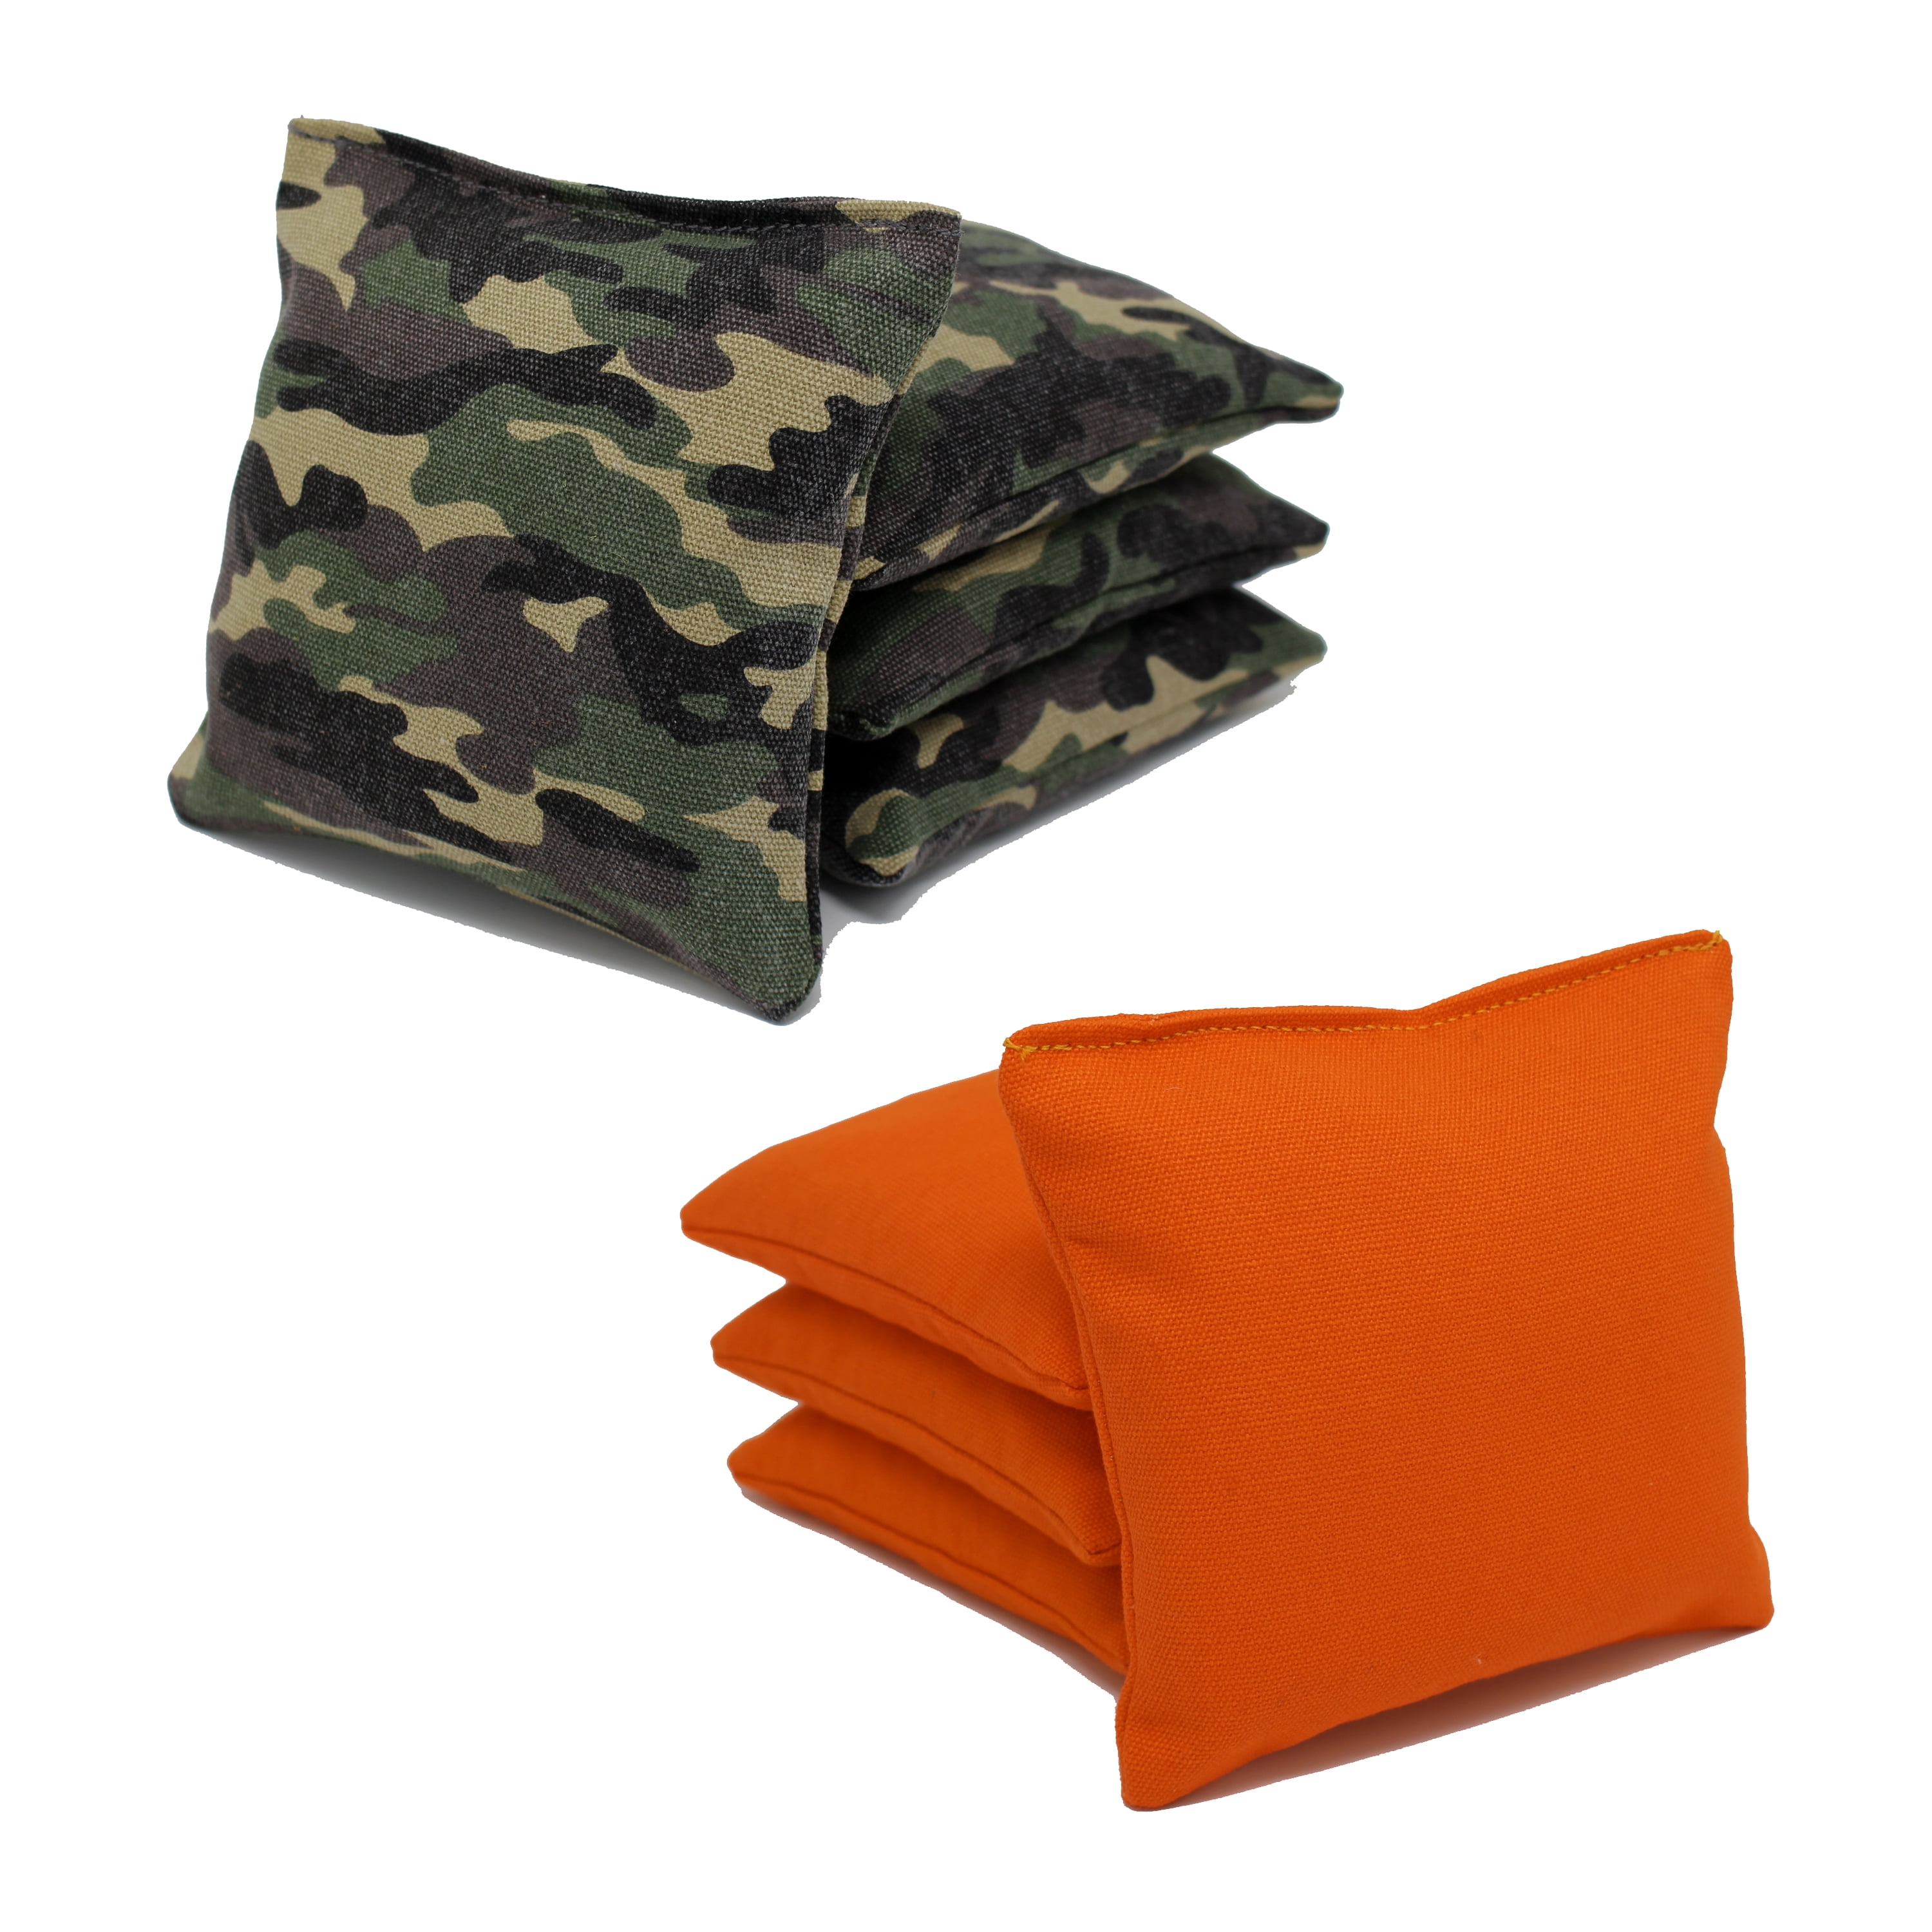 Camouflage-All Weather Set of 8 Regulation Size Corn Hole Bags Top Quality! 